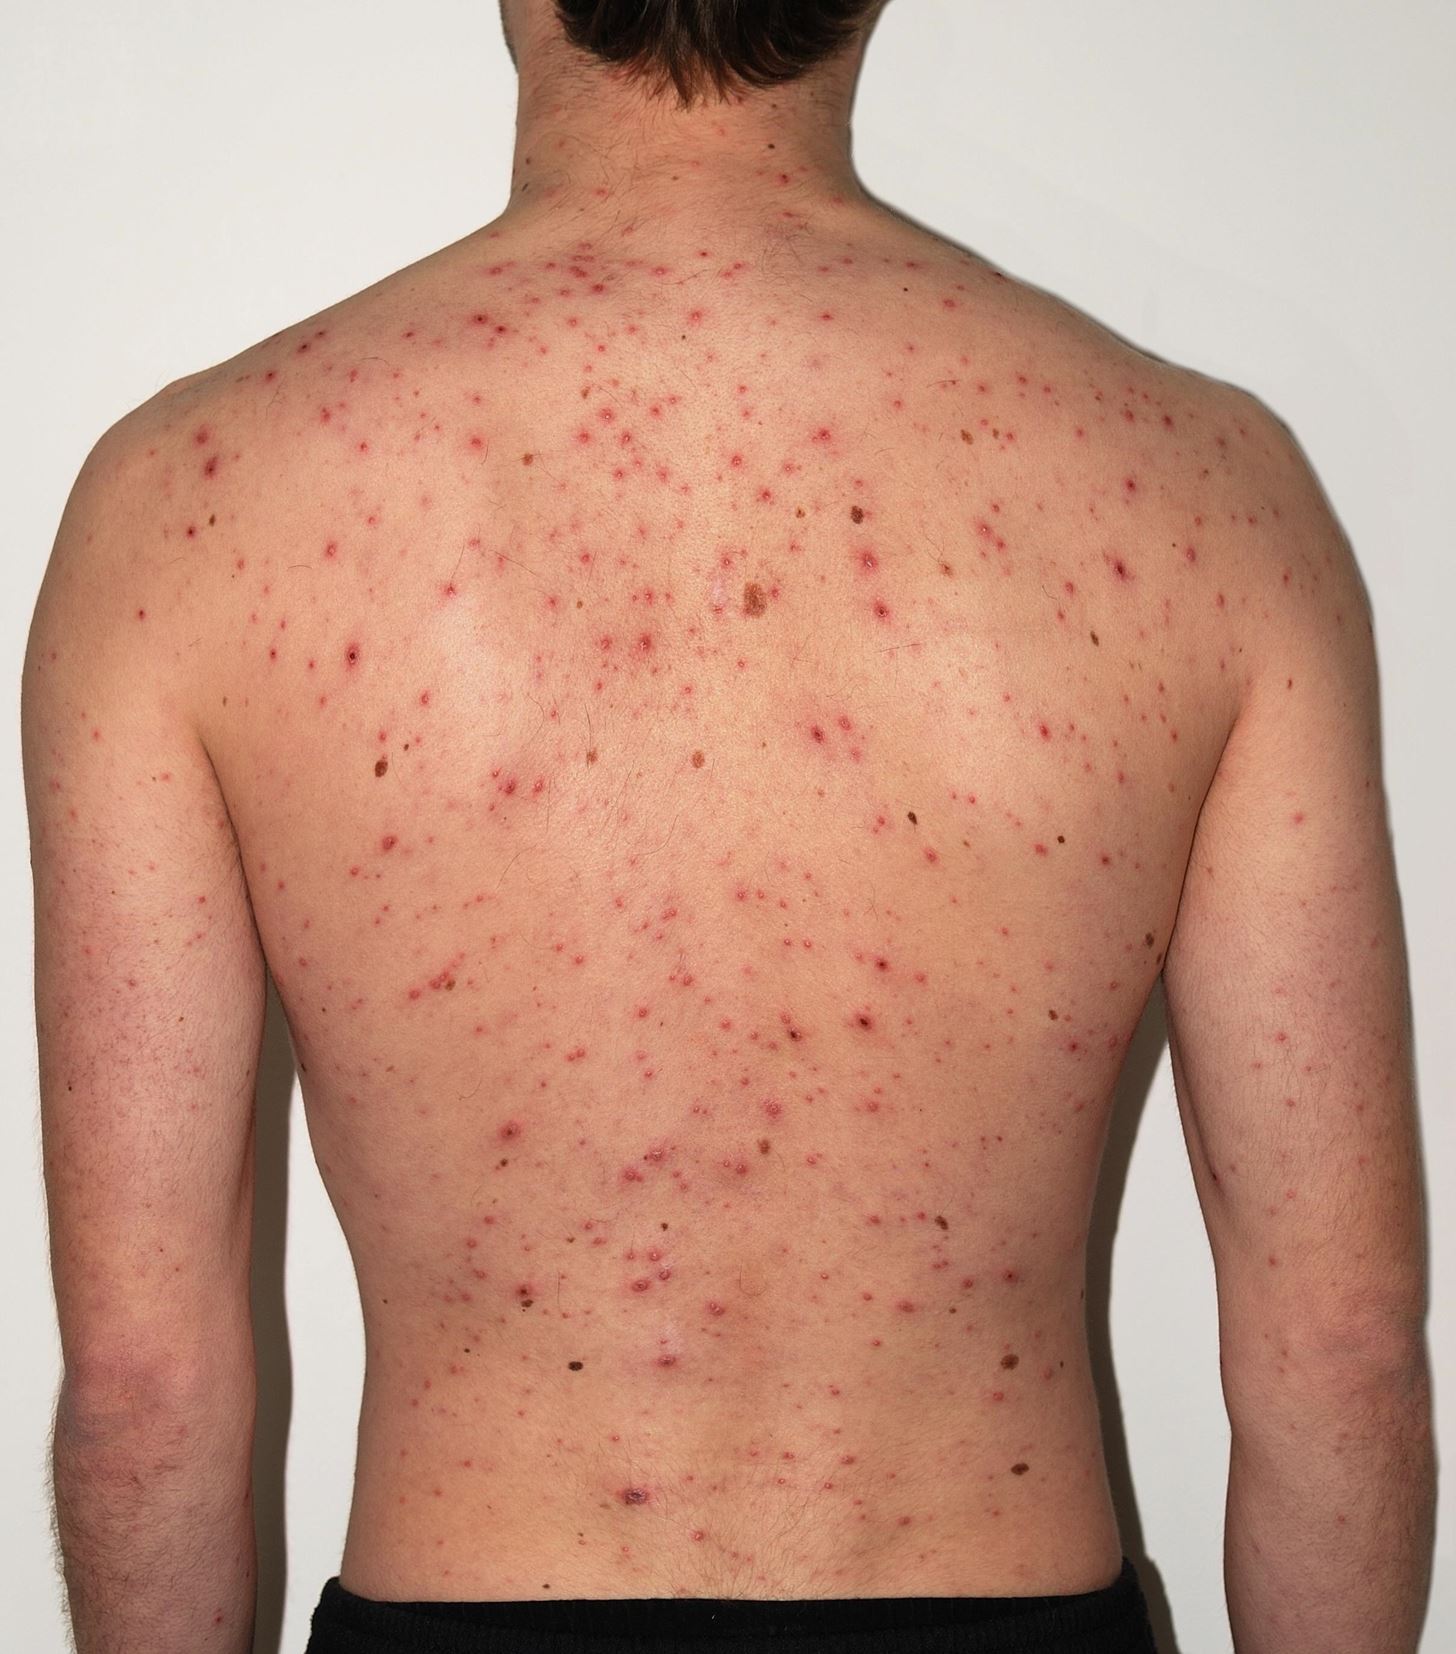 if you're getting shingles flare-ups under 40, get your heart